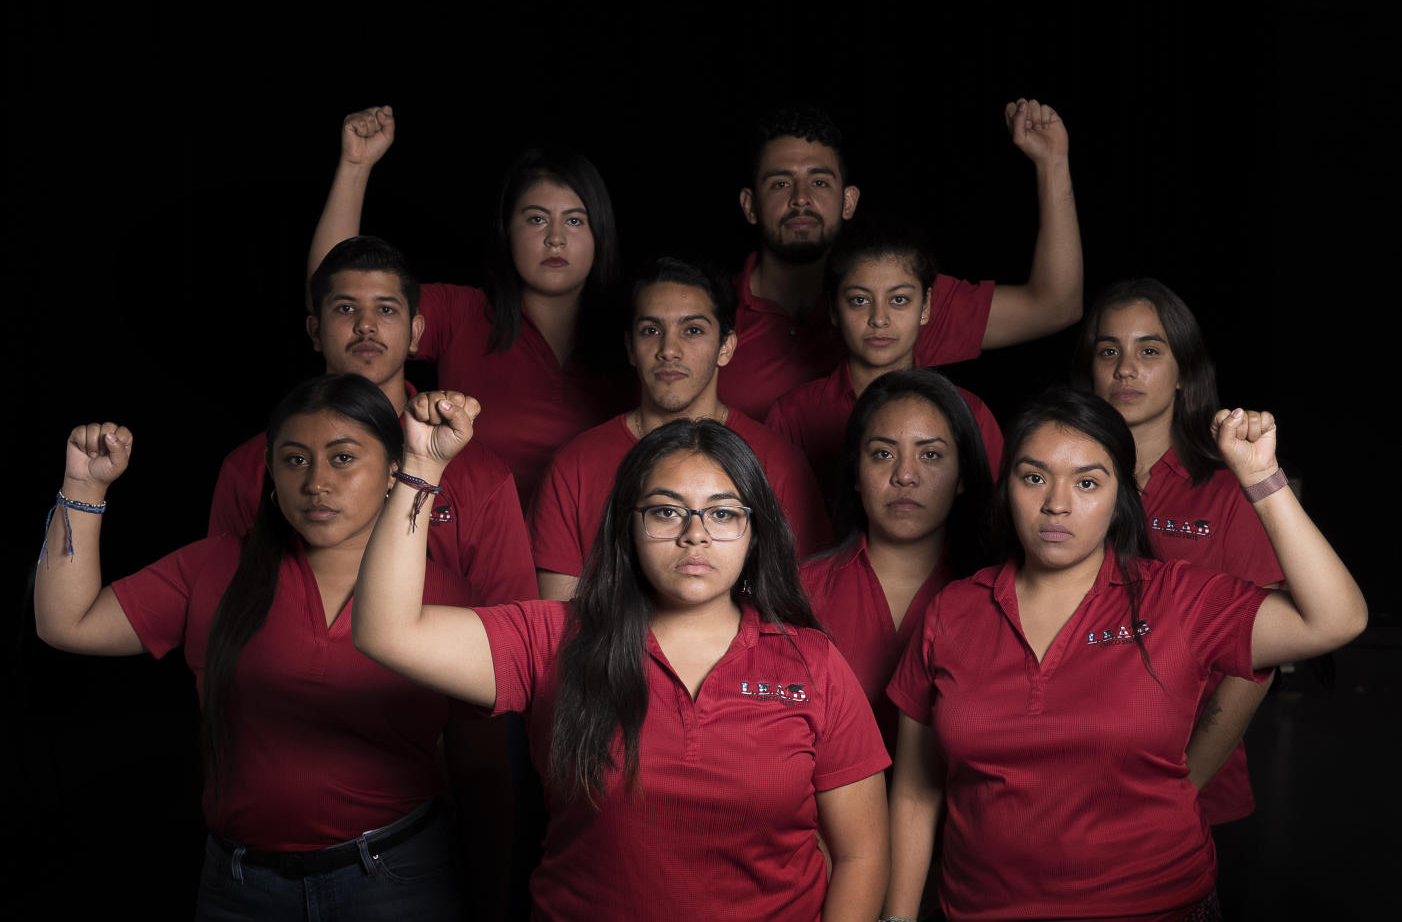 A group of students involved with the Dream Cente raire their fists in show of solidarity and support while all wearing red polos.